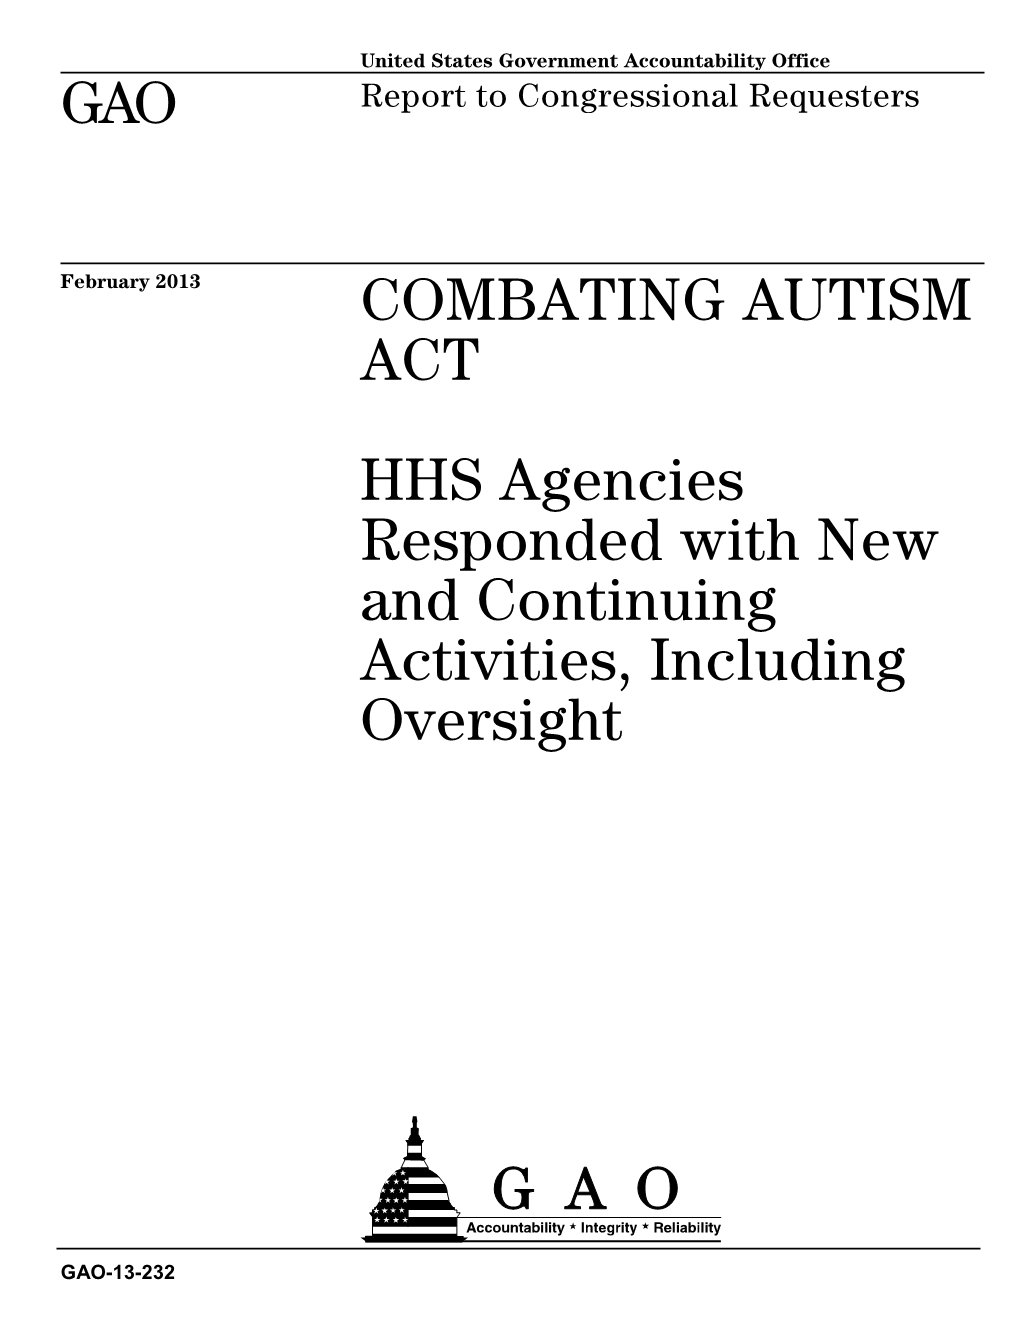 COMBATING AUTISM ACT HHS Agencies Responded with New and Continuing Activities, Including Oversight